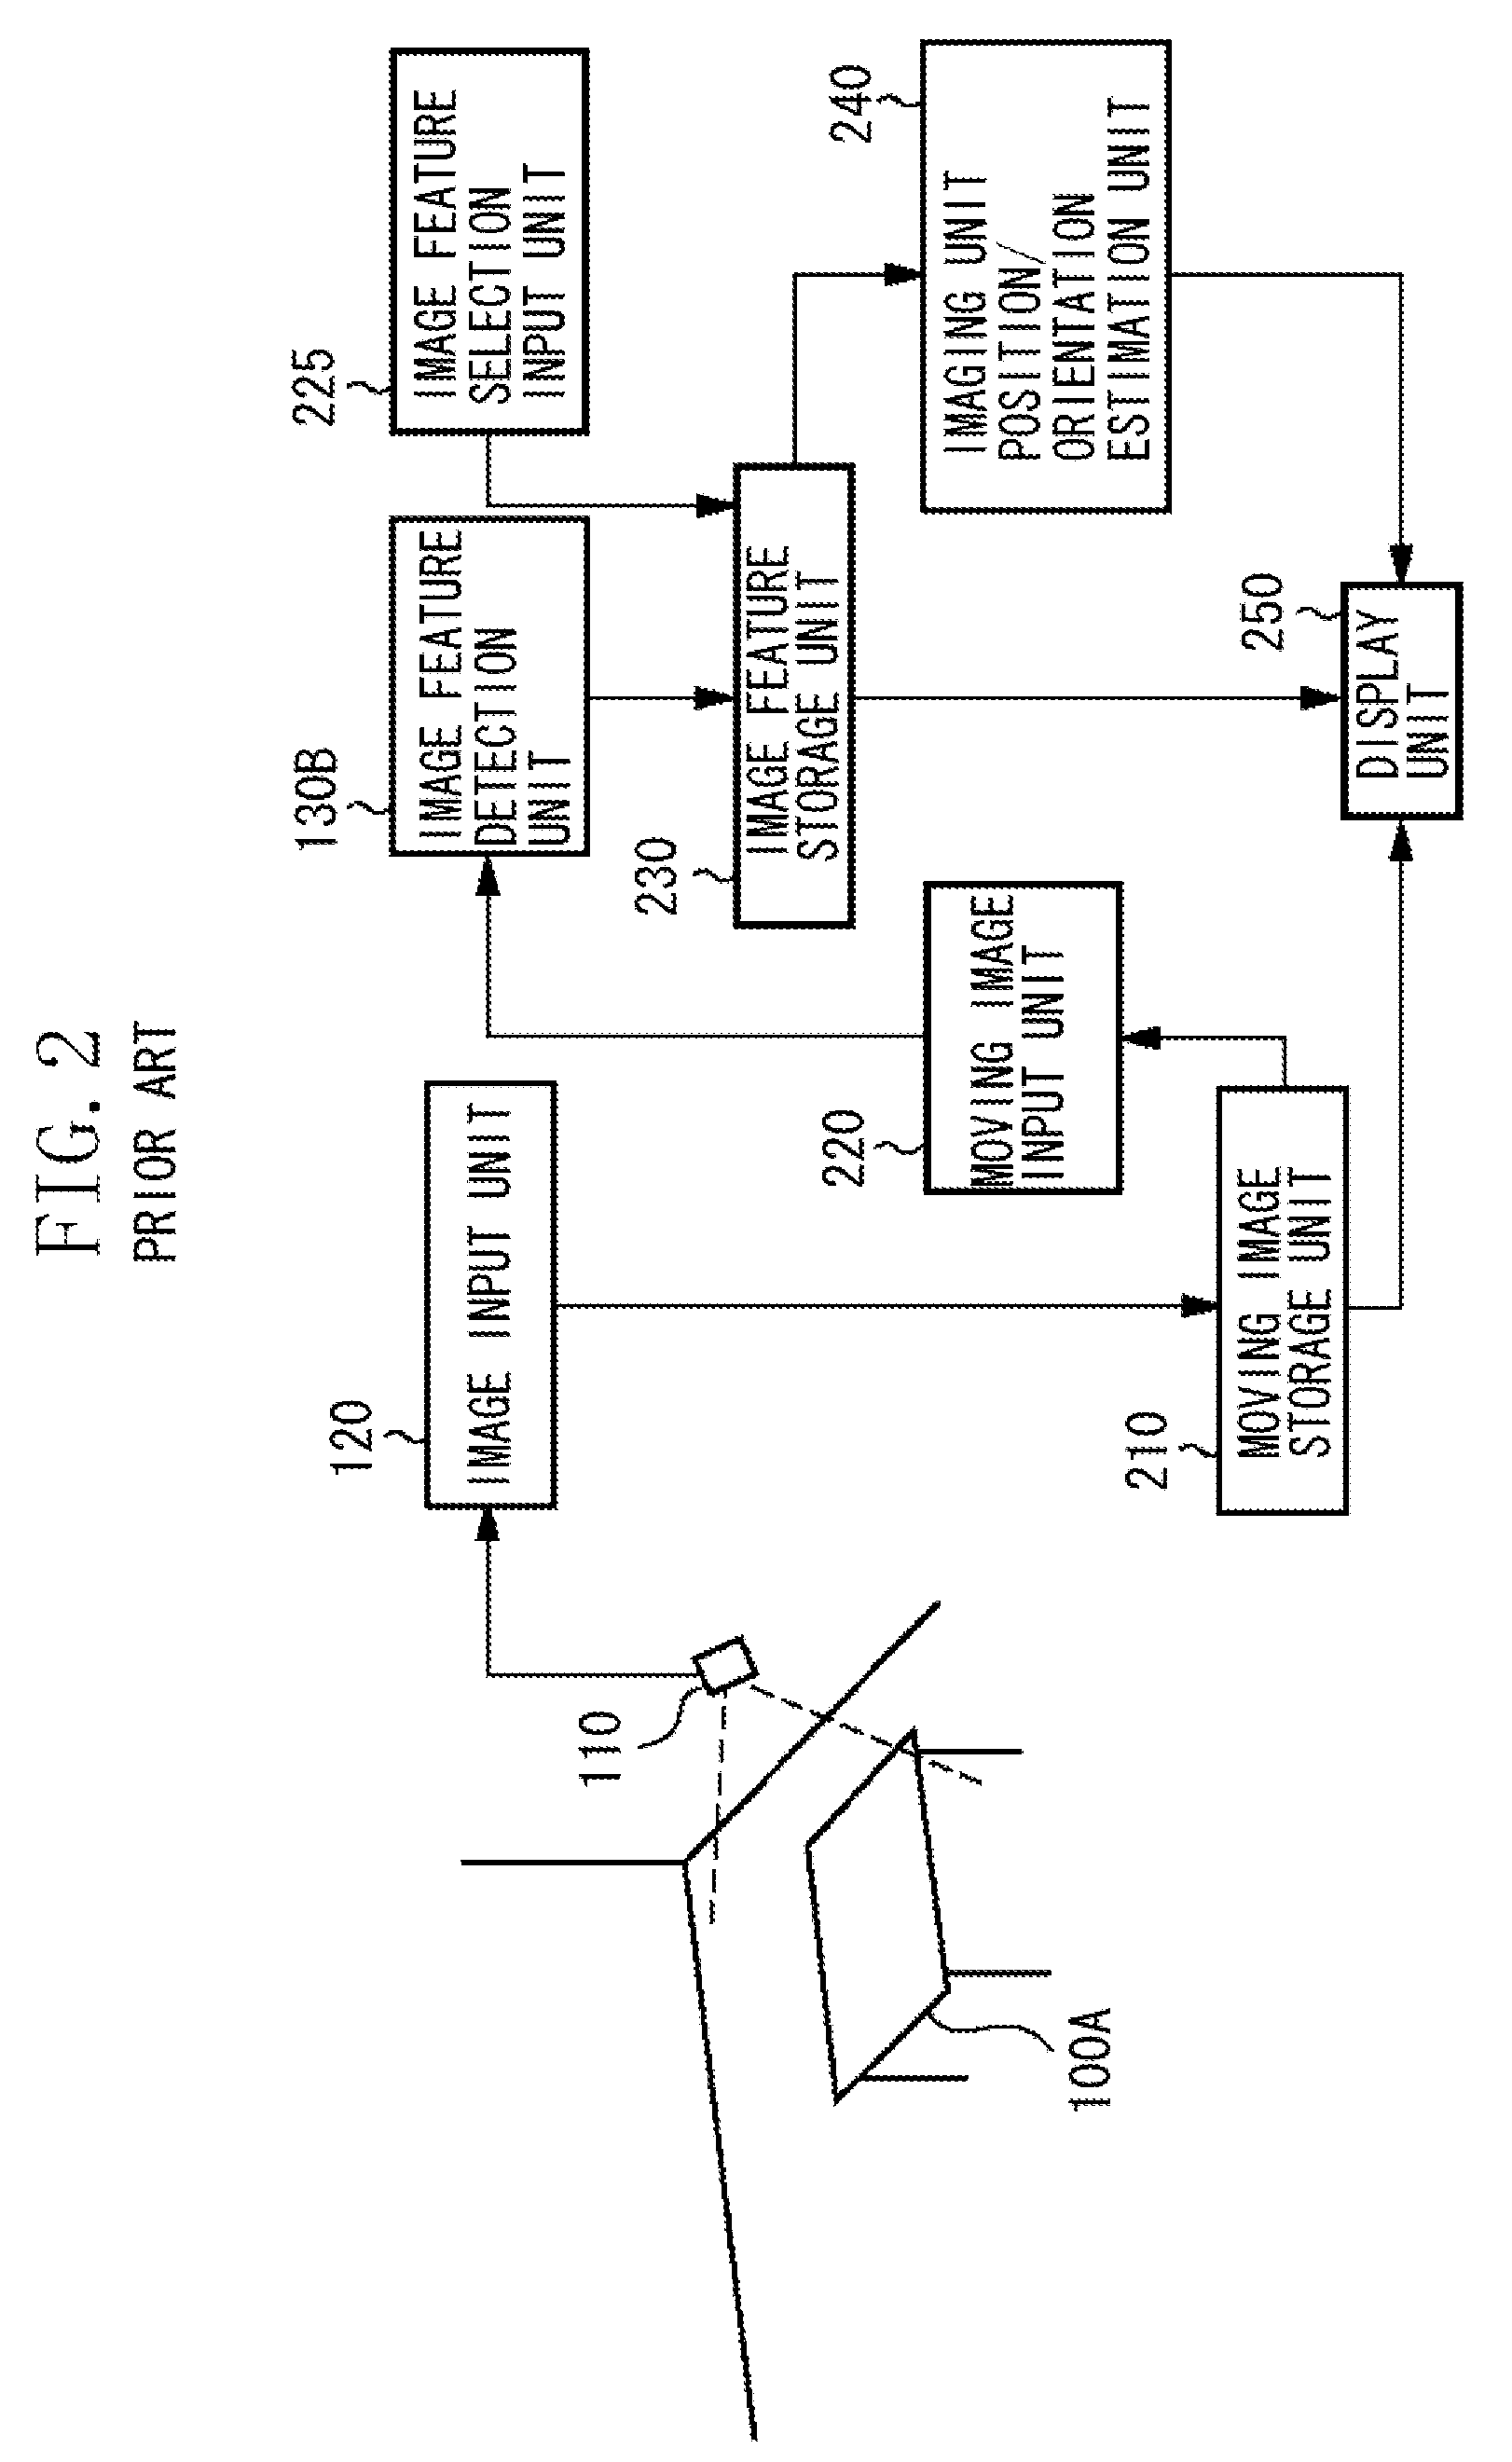 Image processing apparatus and method for obtaining position and orientation of imaging apparatus